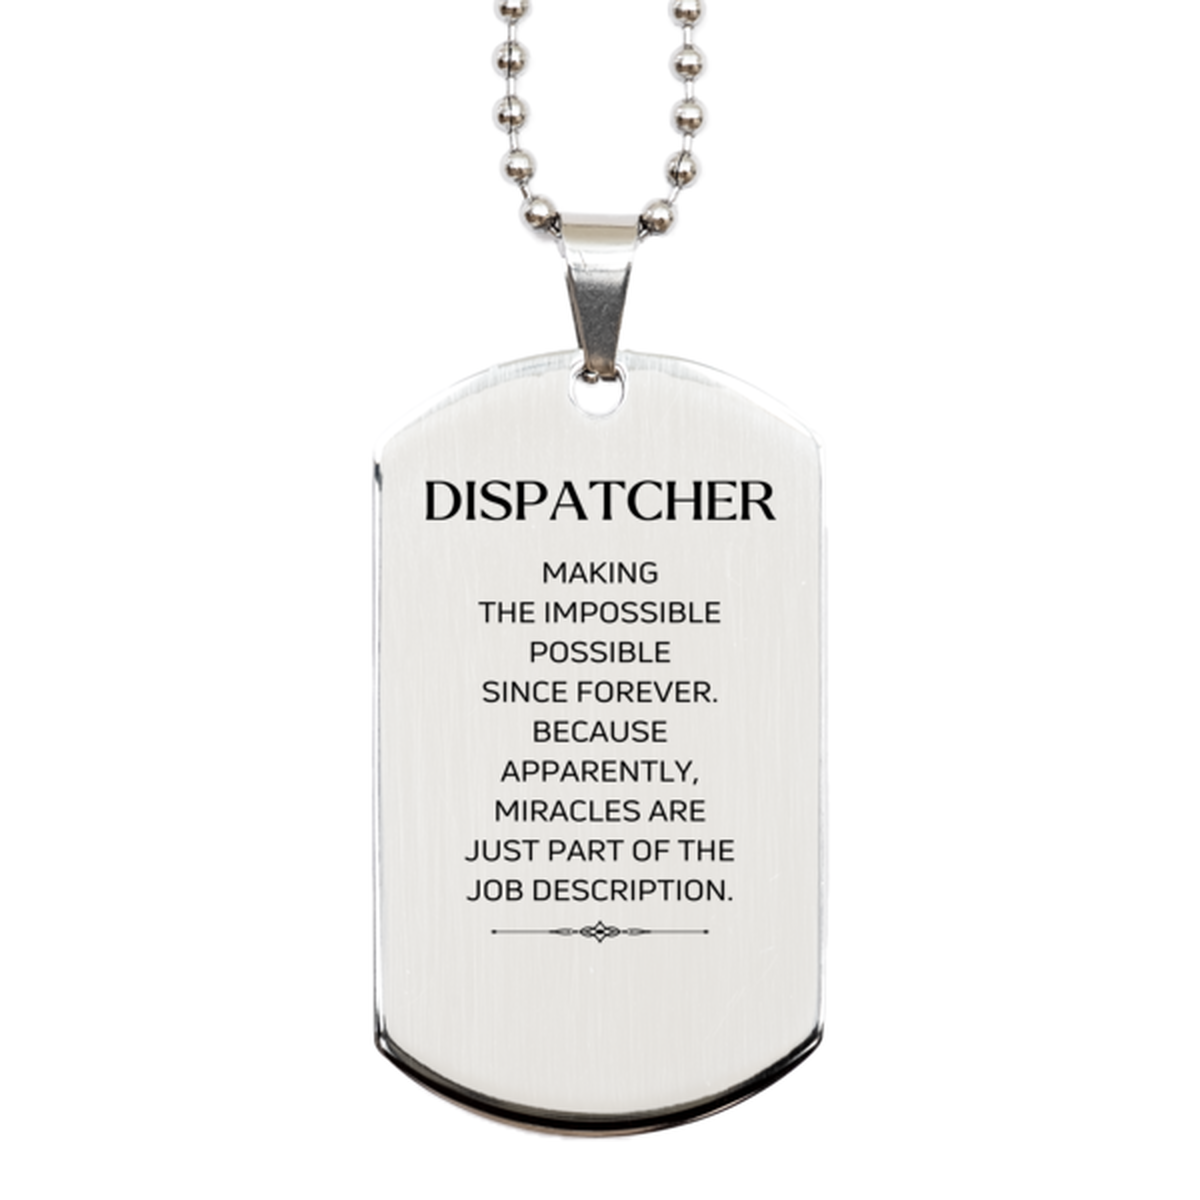 Funny Dispatcher Gifts, Miracles are just part of the job description, Inspirational Birthday Silver Dog Tag For Dispatcher, Men, Women, Coworkers, Friends, Boss